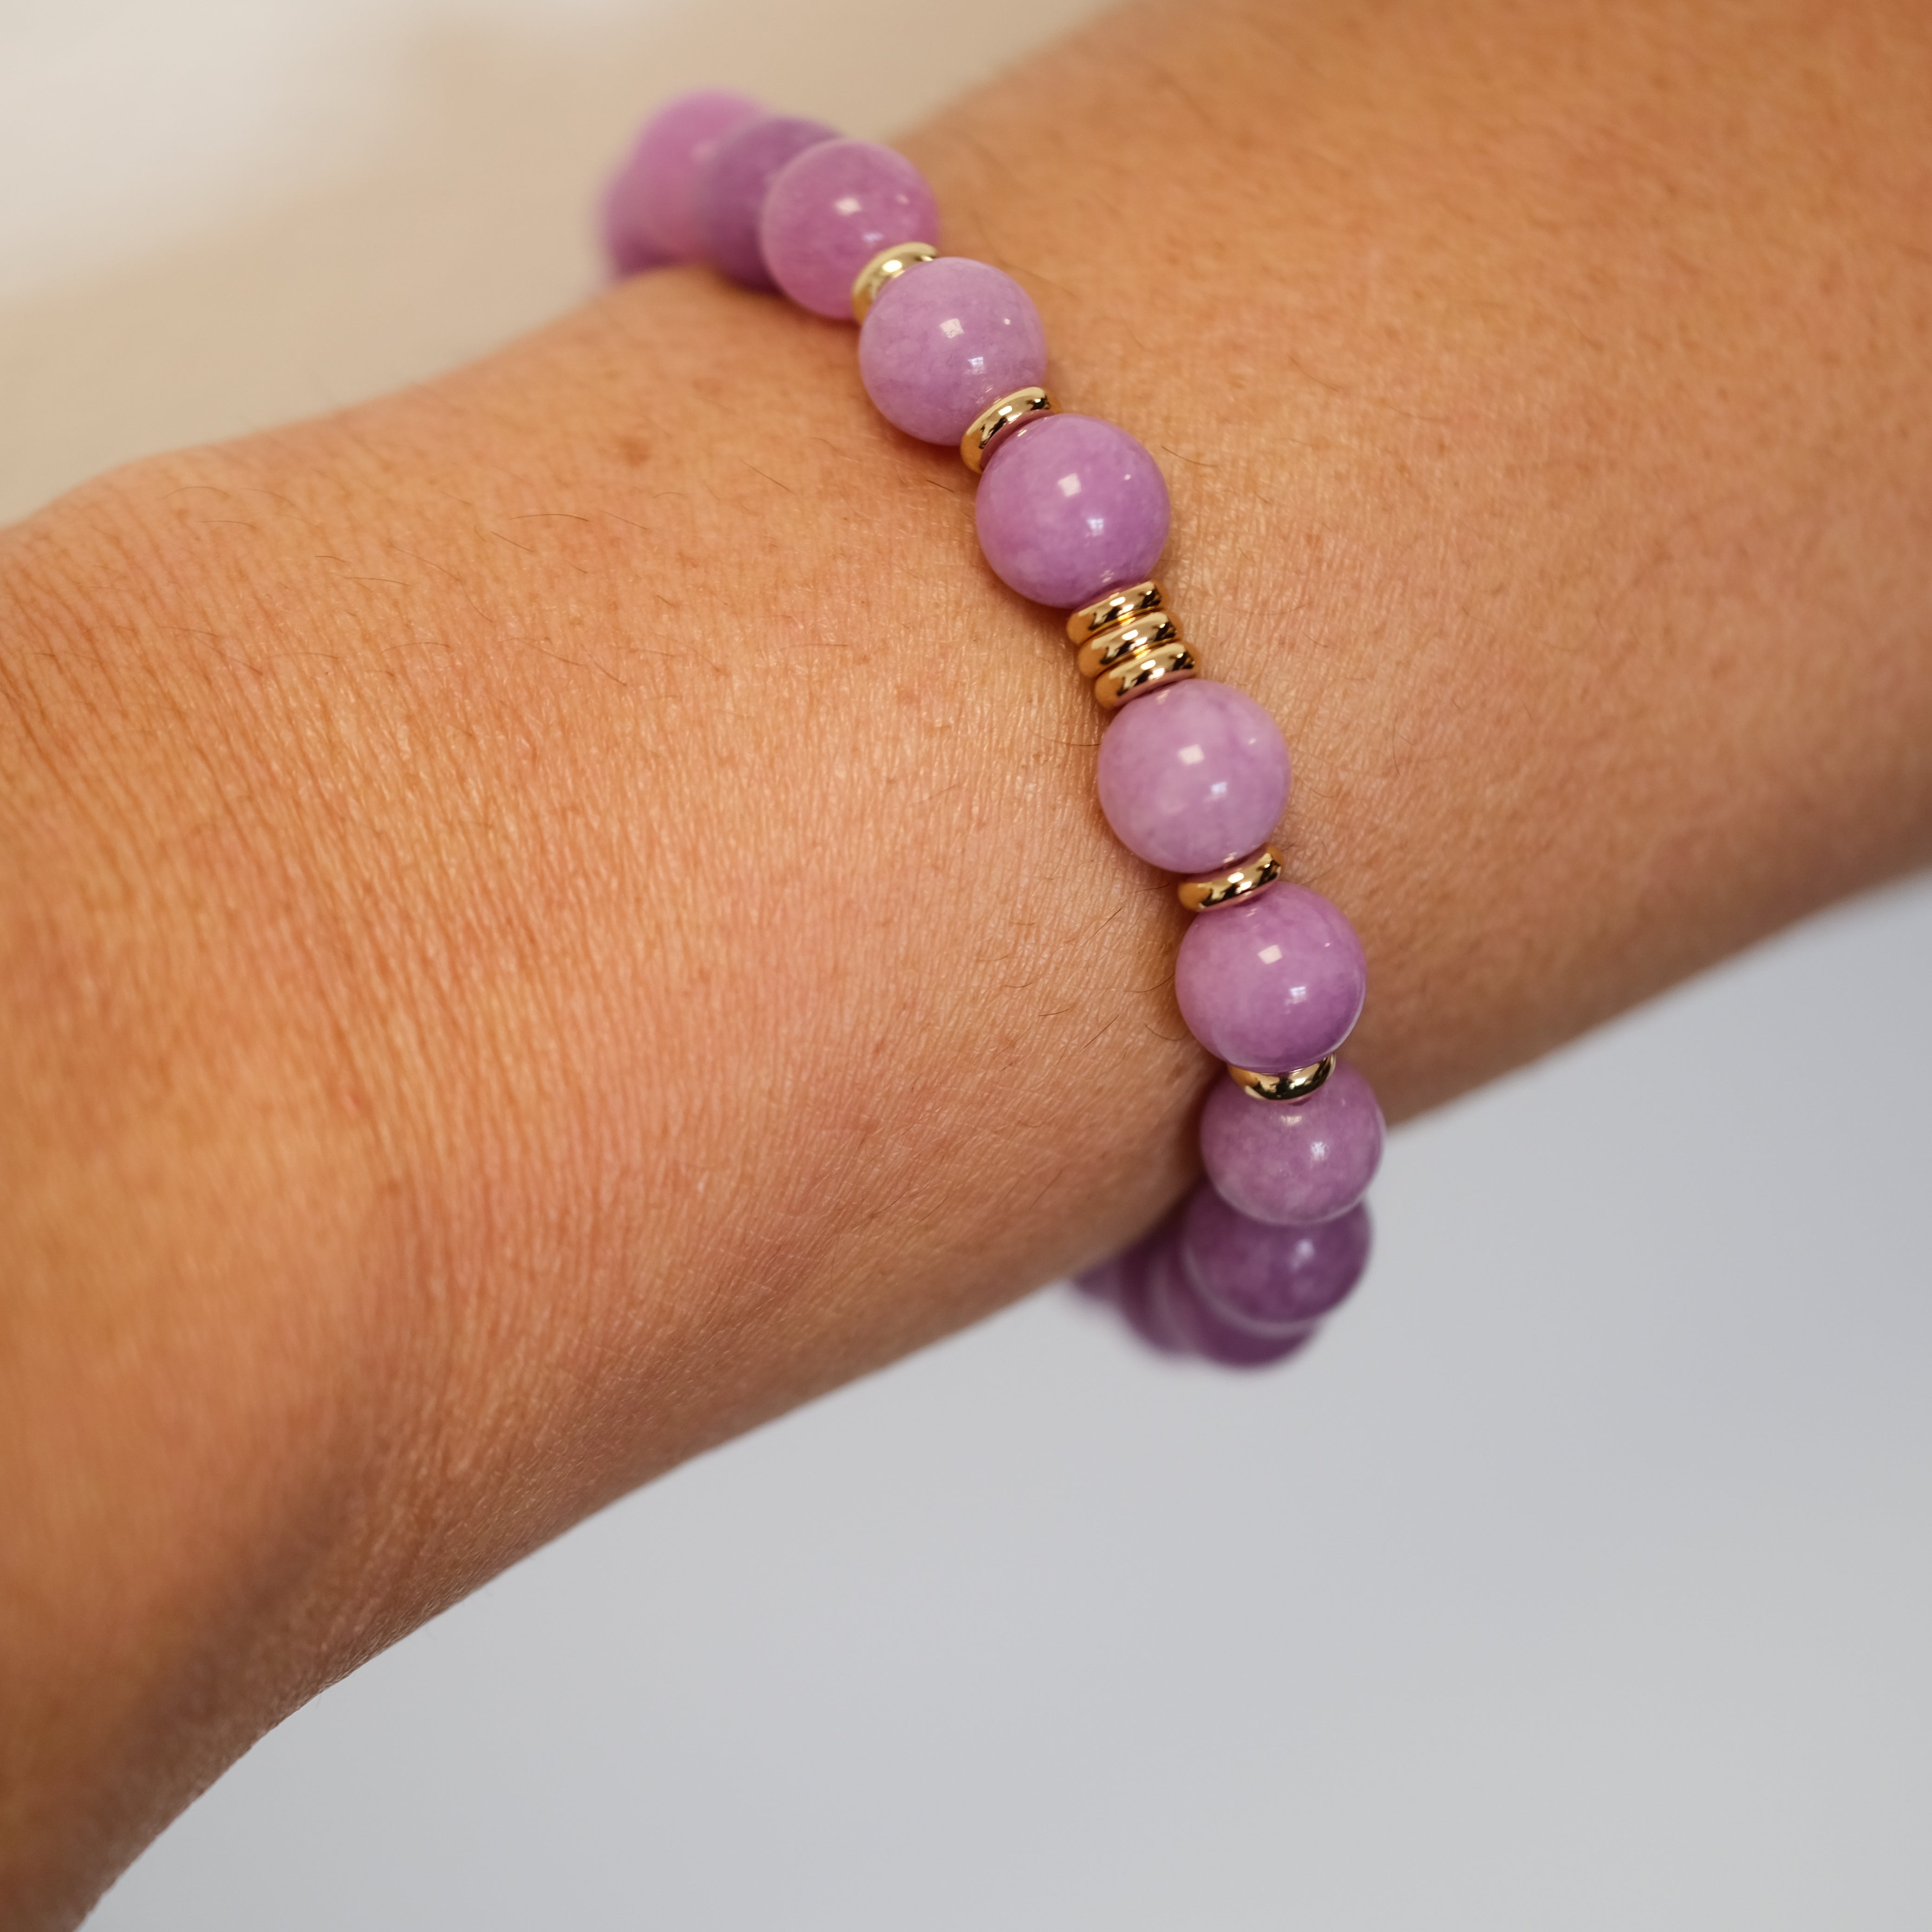 Lepidolite gemstone bracelet with gold accessories on a model's wrist